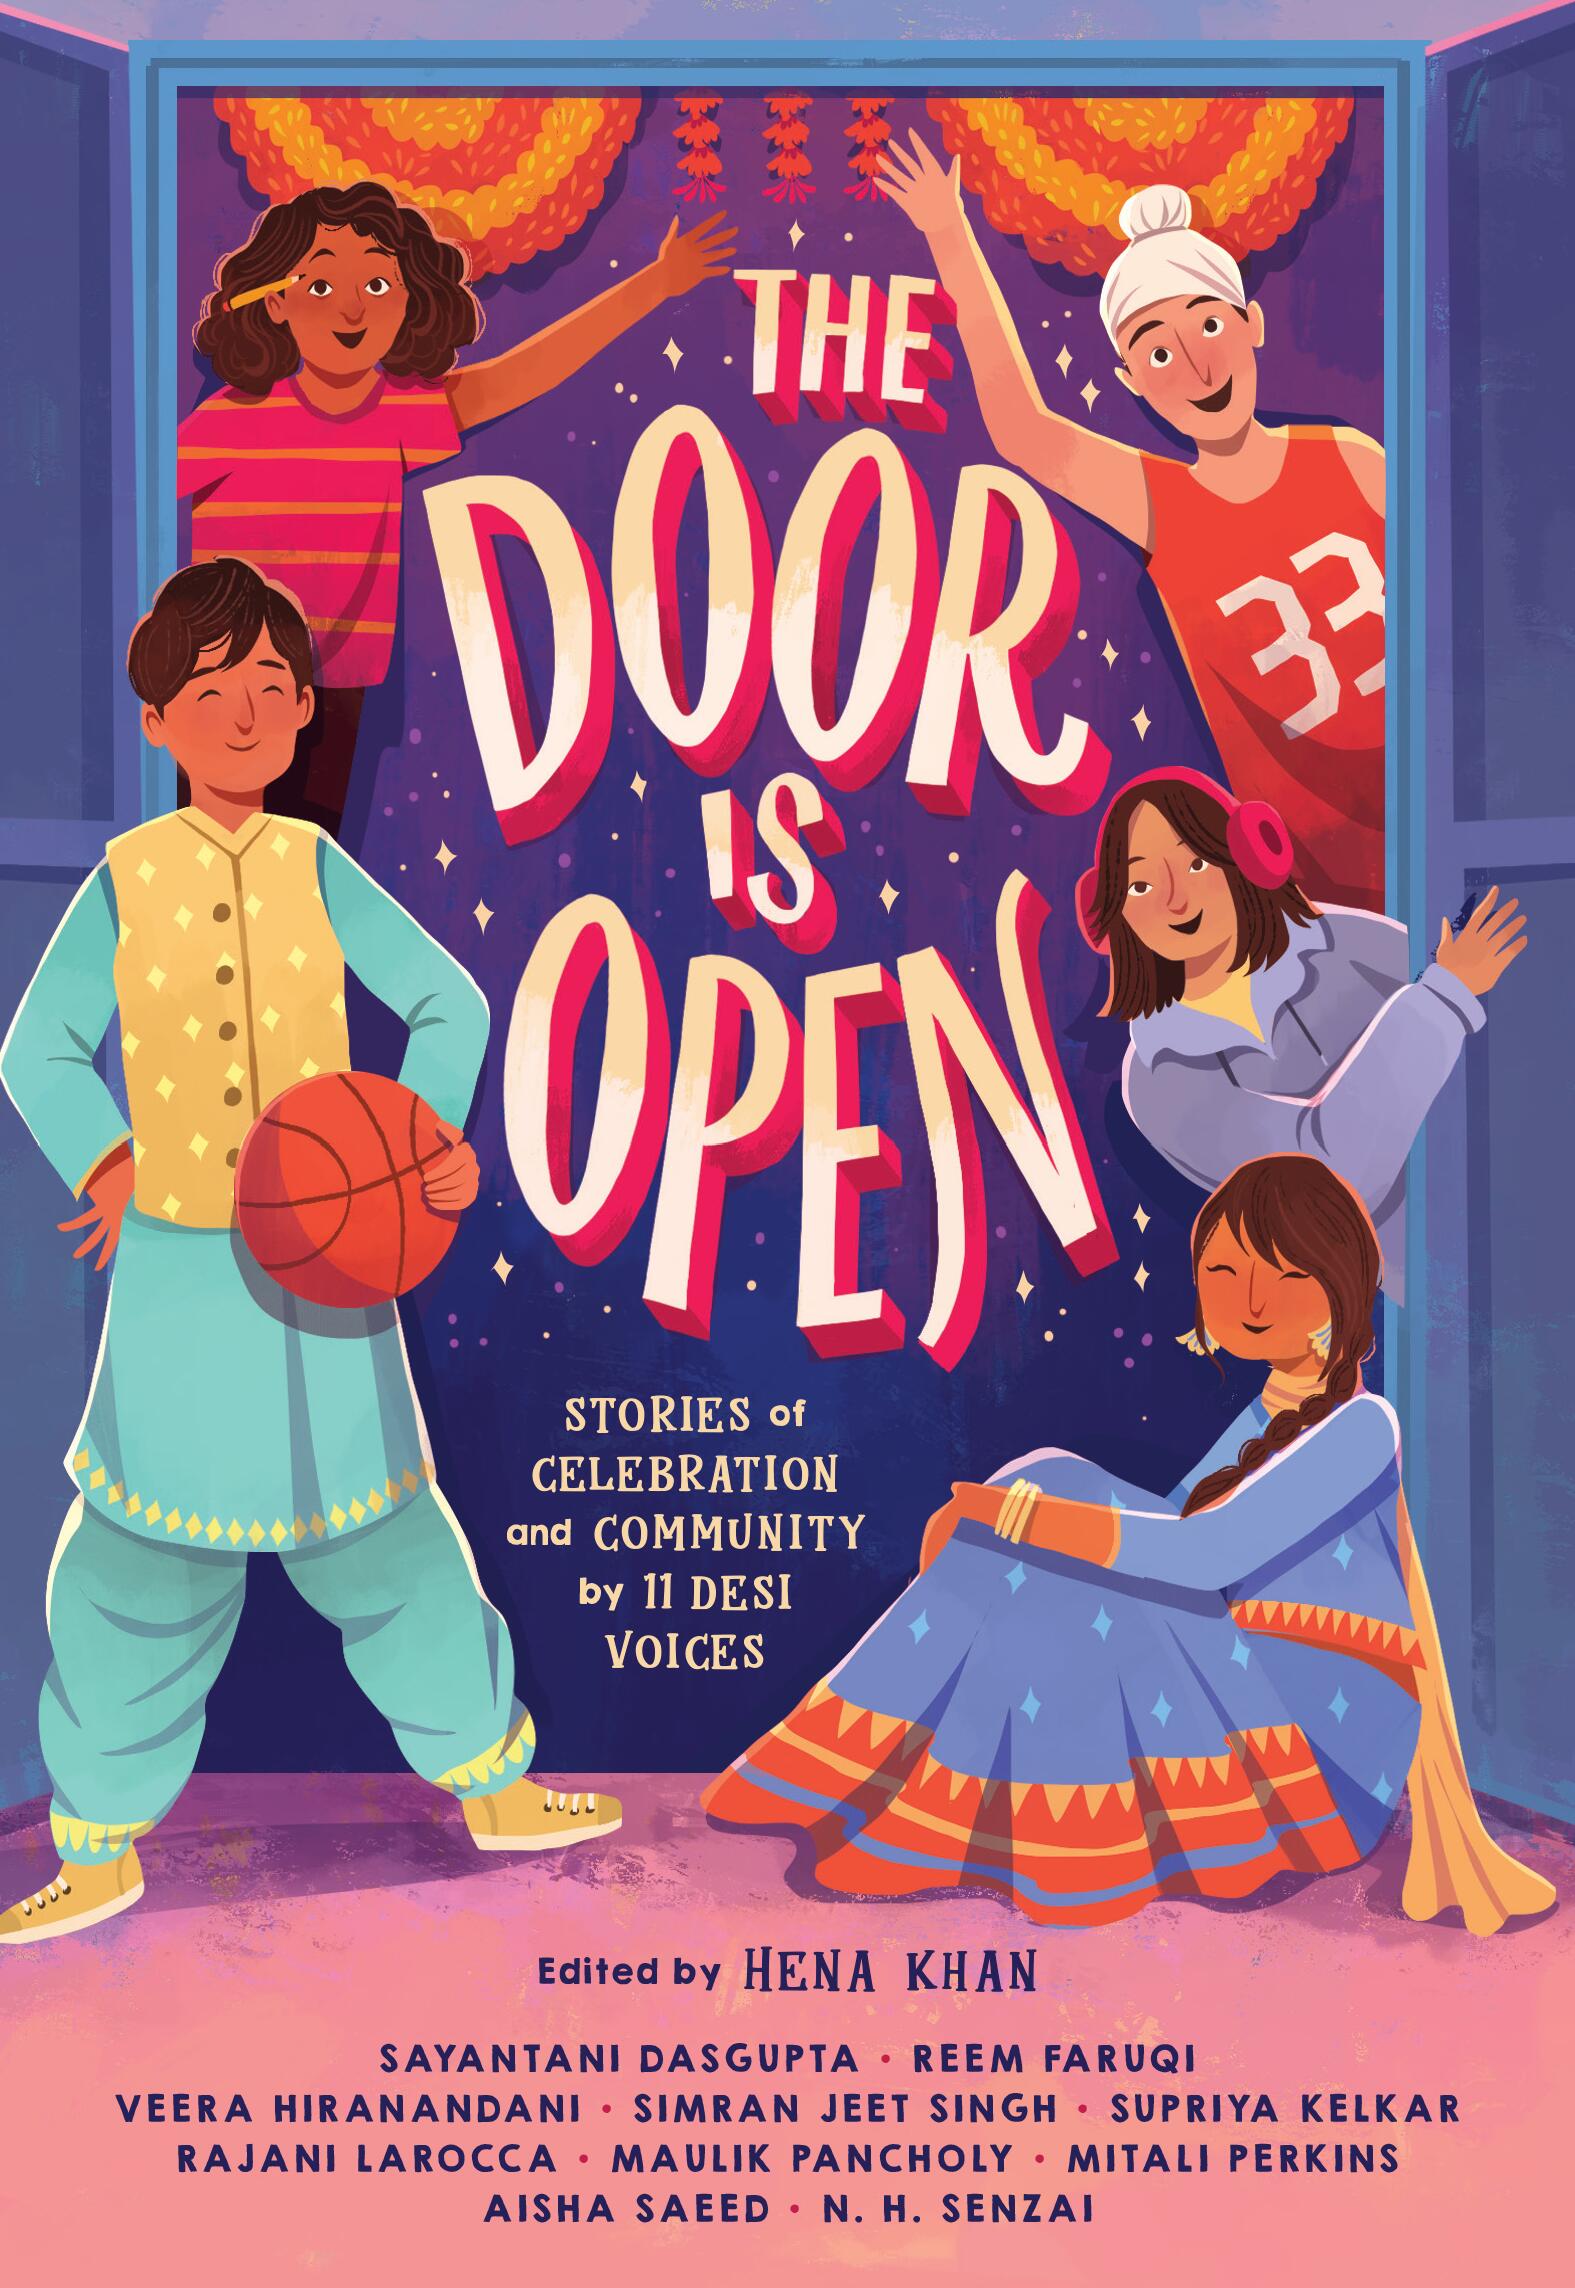 The Door Is Open Stories of Celebration and Community by 11 Desi Voices edited by Hena Khan